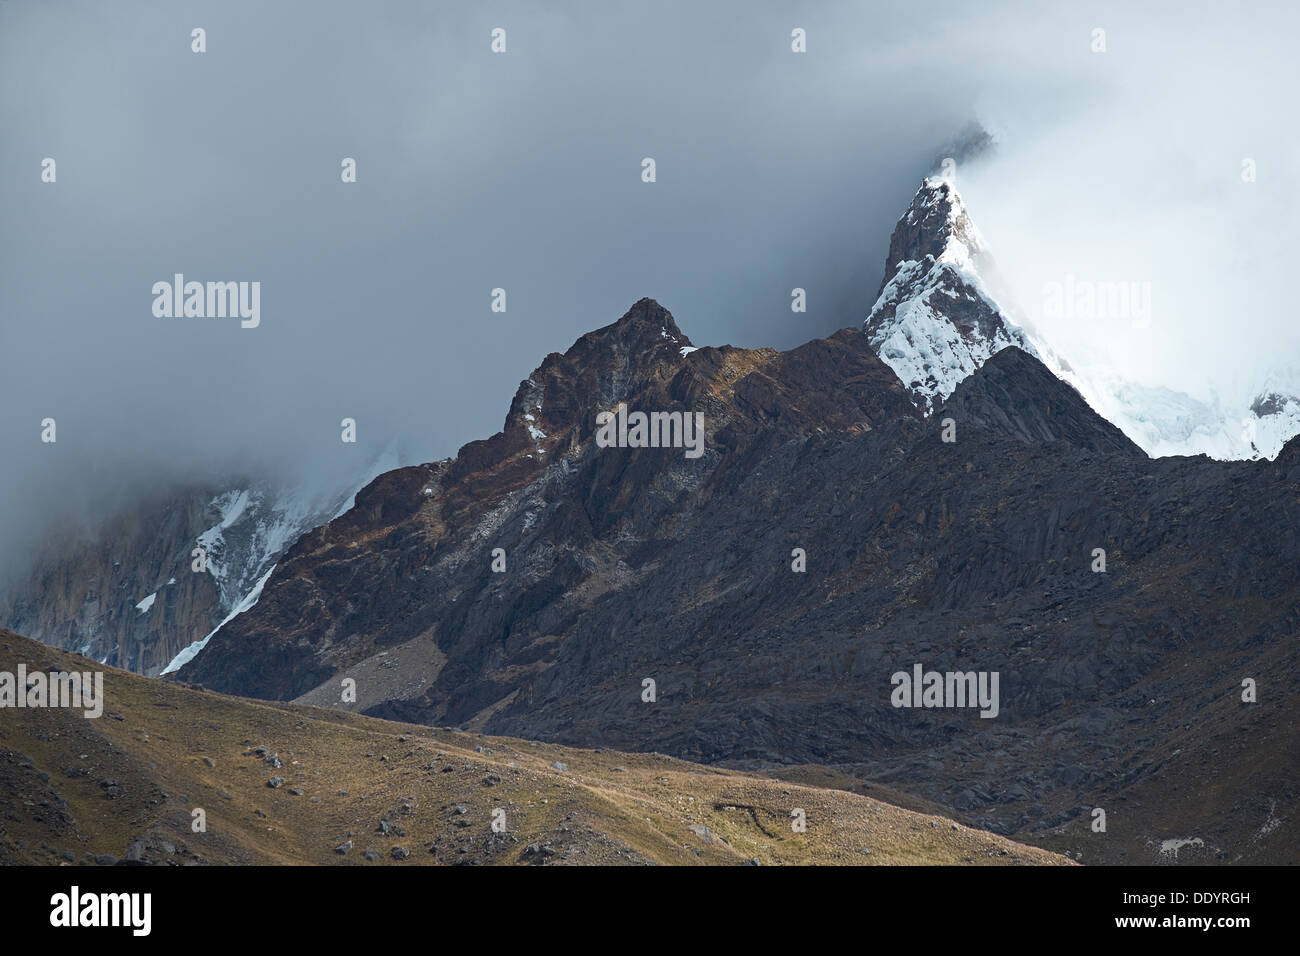 Storm Clouds over the summit of Huascaran in the Huascarán National Park, Peruvian Andes. Stock Photo